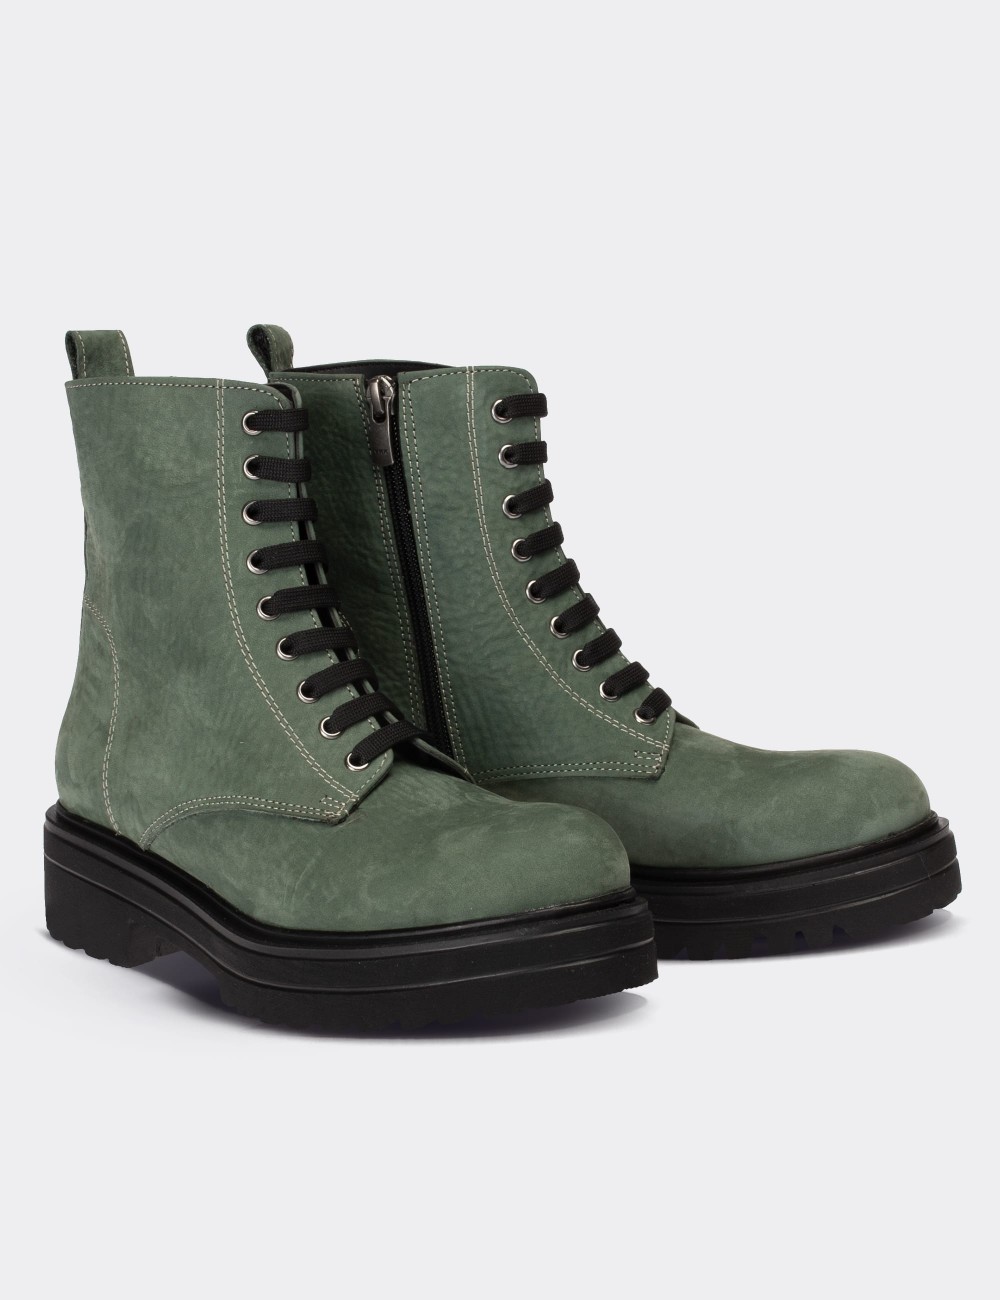 Green  Leather Postal Boots - 01814ZYSLE08